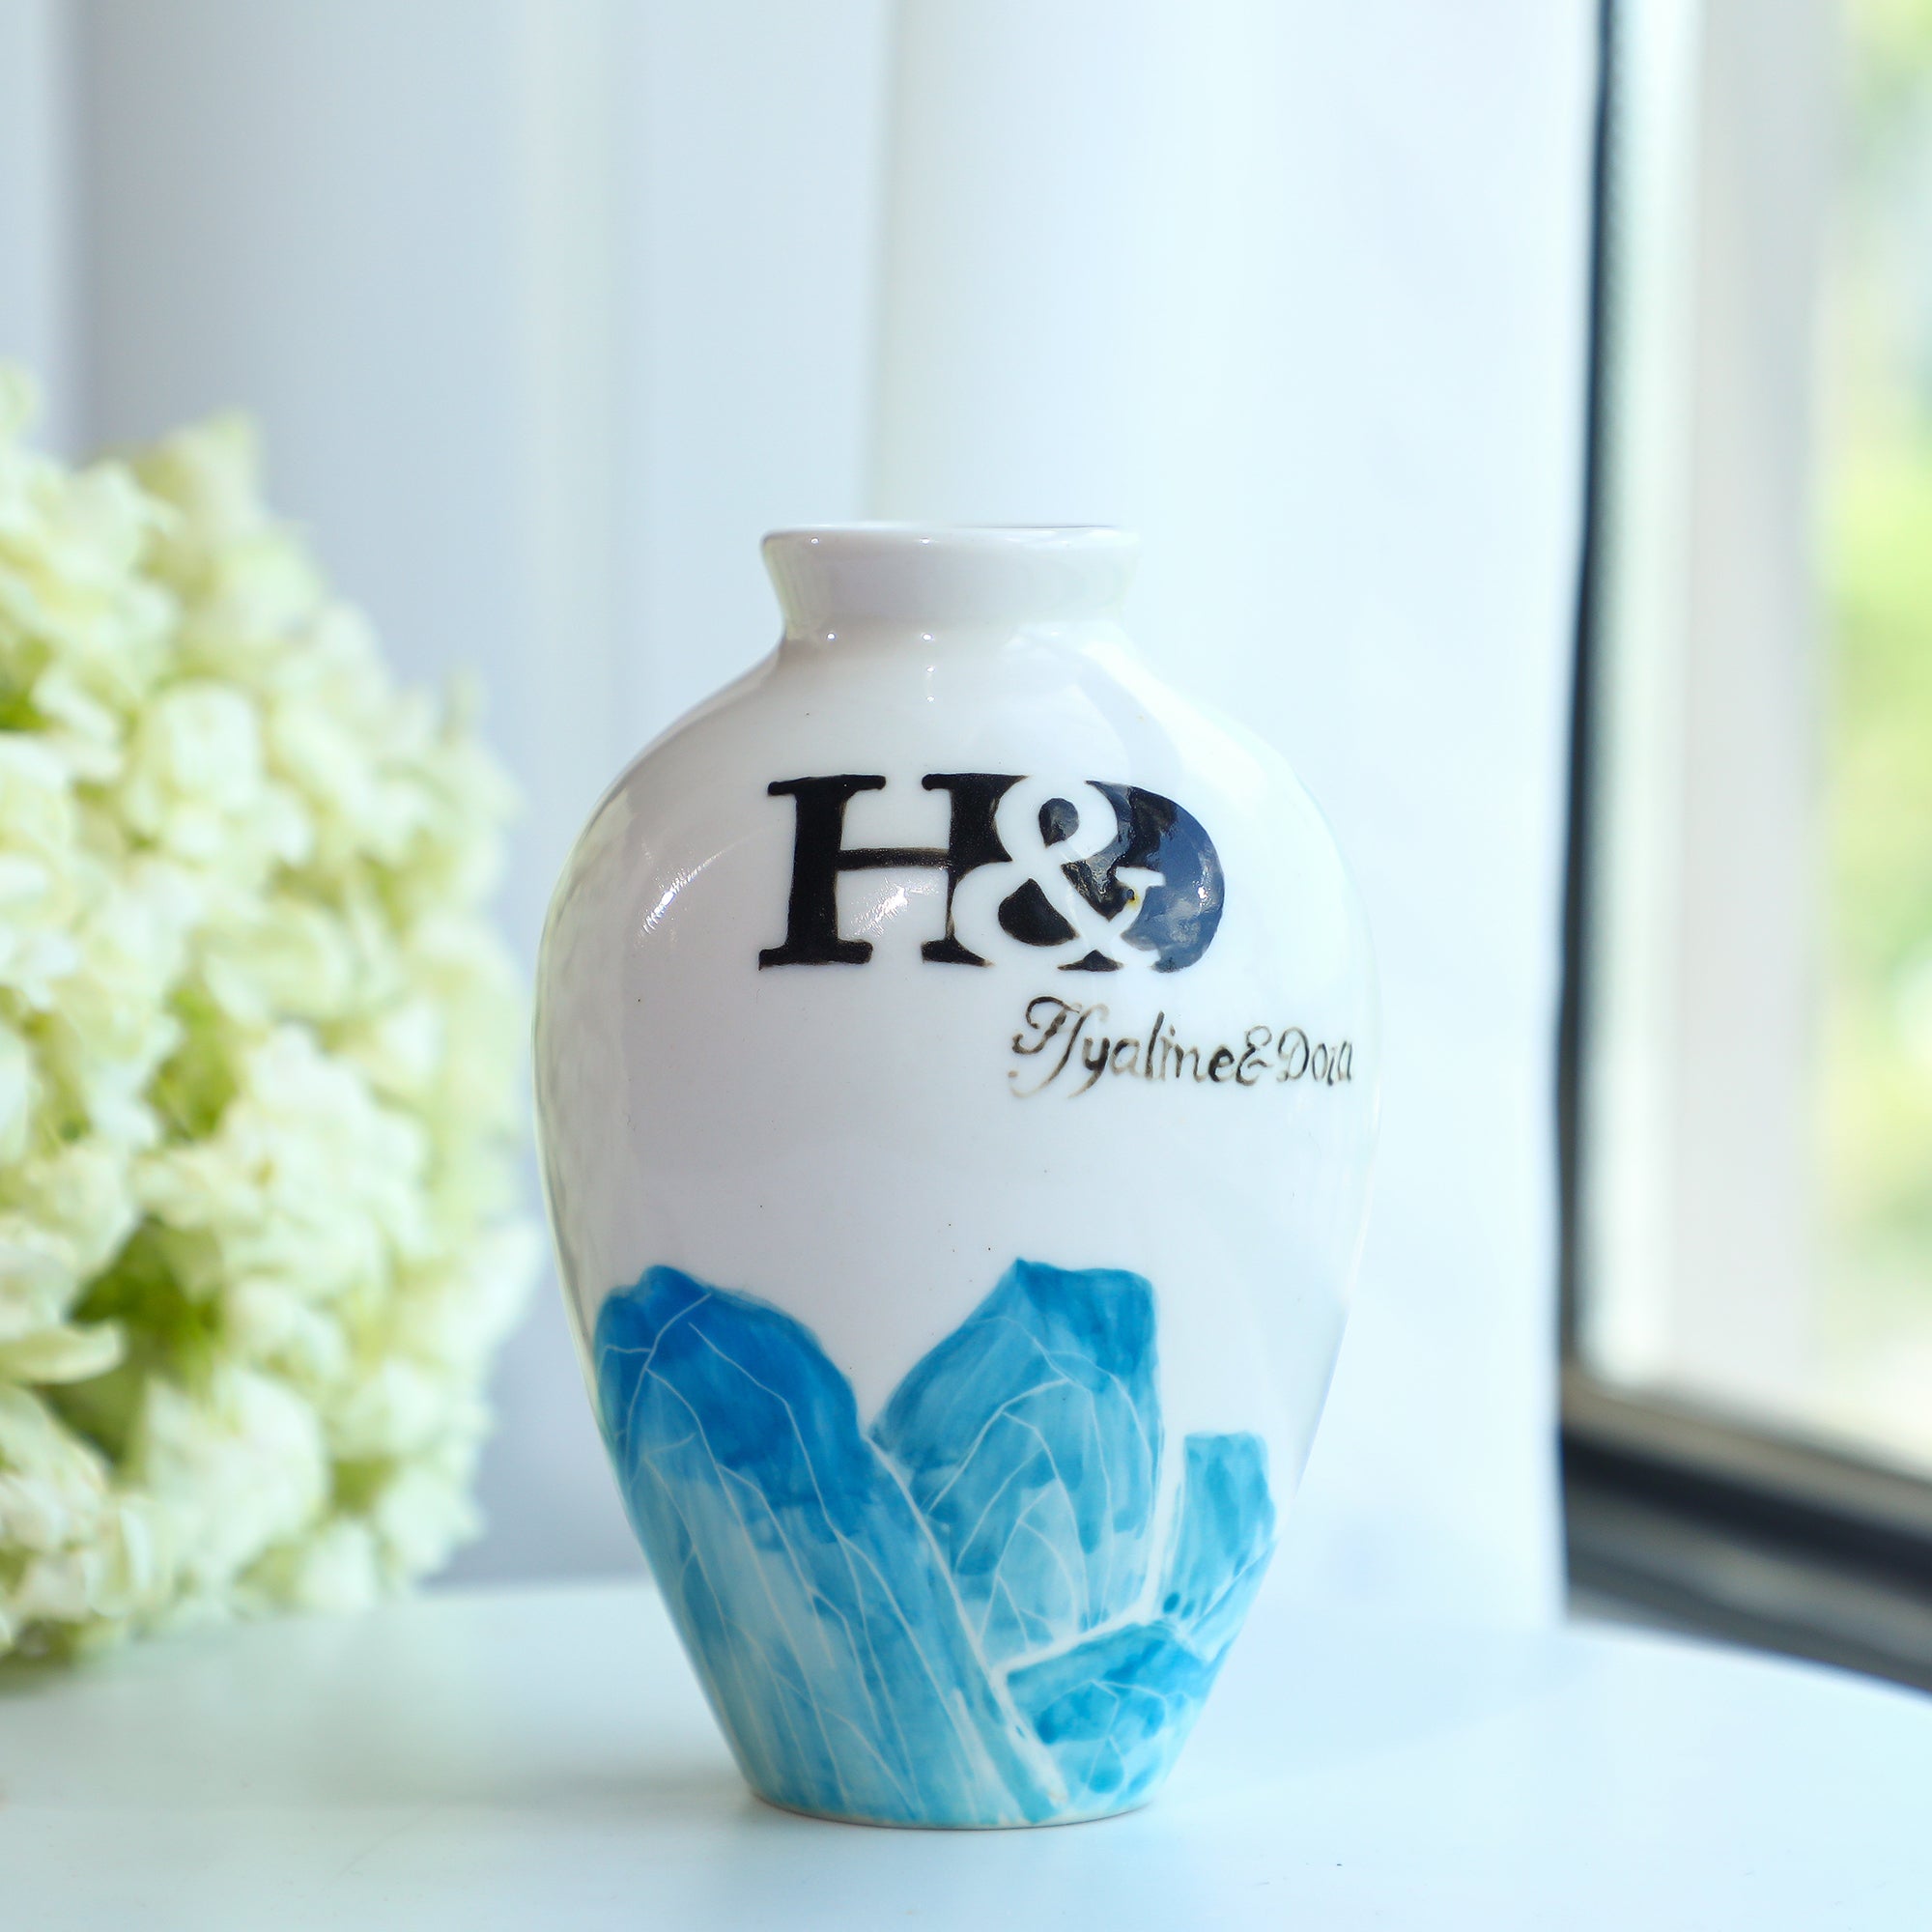 Hand Painted H&D HYALINE & DORA logo Clay Pot for flower Pottery Pot sold  by H&D HYALINE & DORA